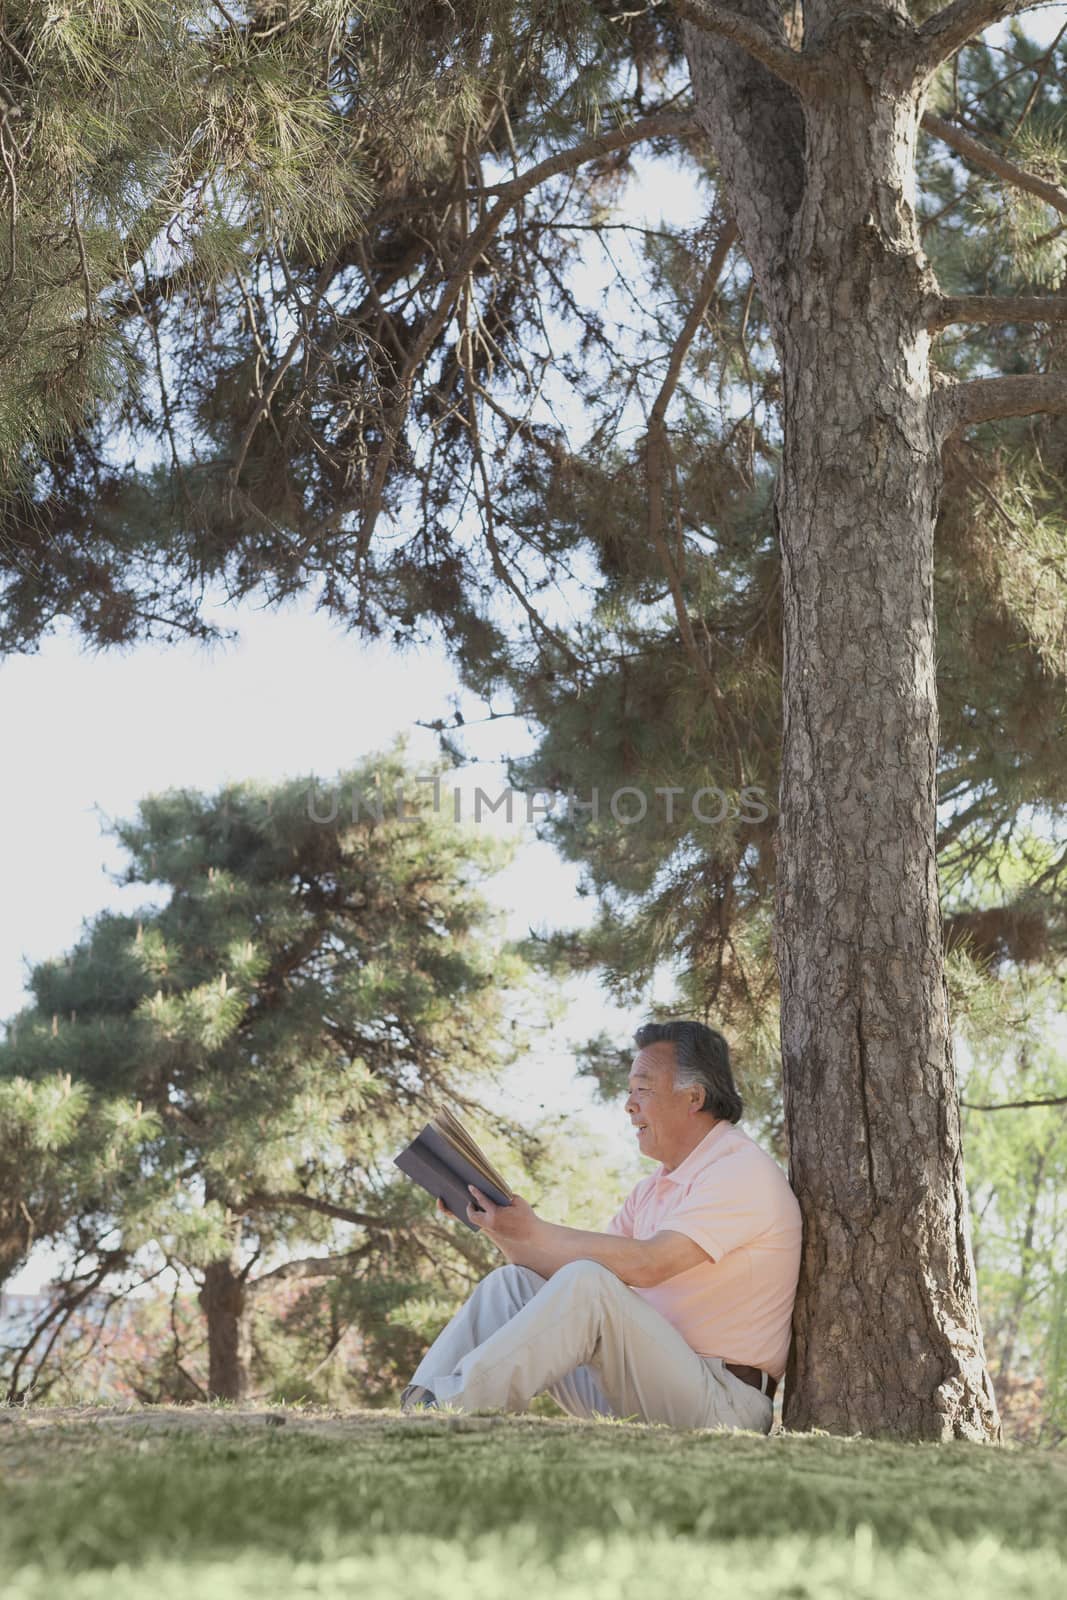 Senior man relaxing under a tree and reading a book in a park in the springtime, Beijing by XiXinXing